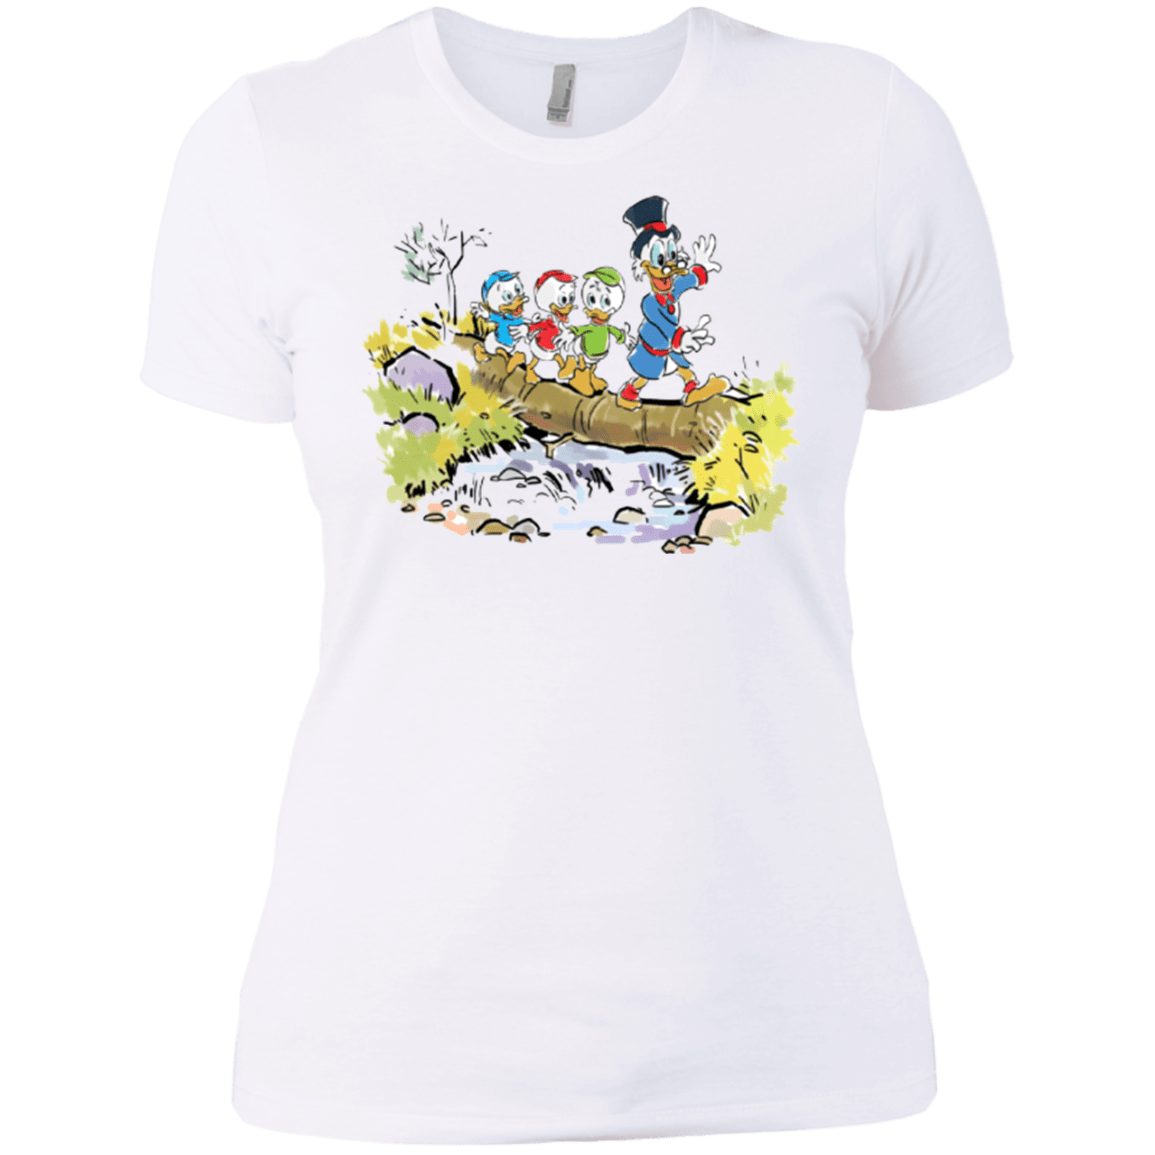 T-Shirts White / X-Small Looking for Adventure Women's Premium T-Shirt